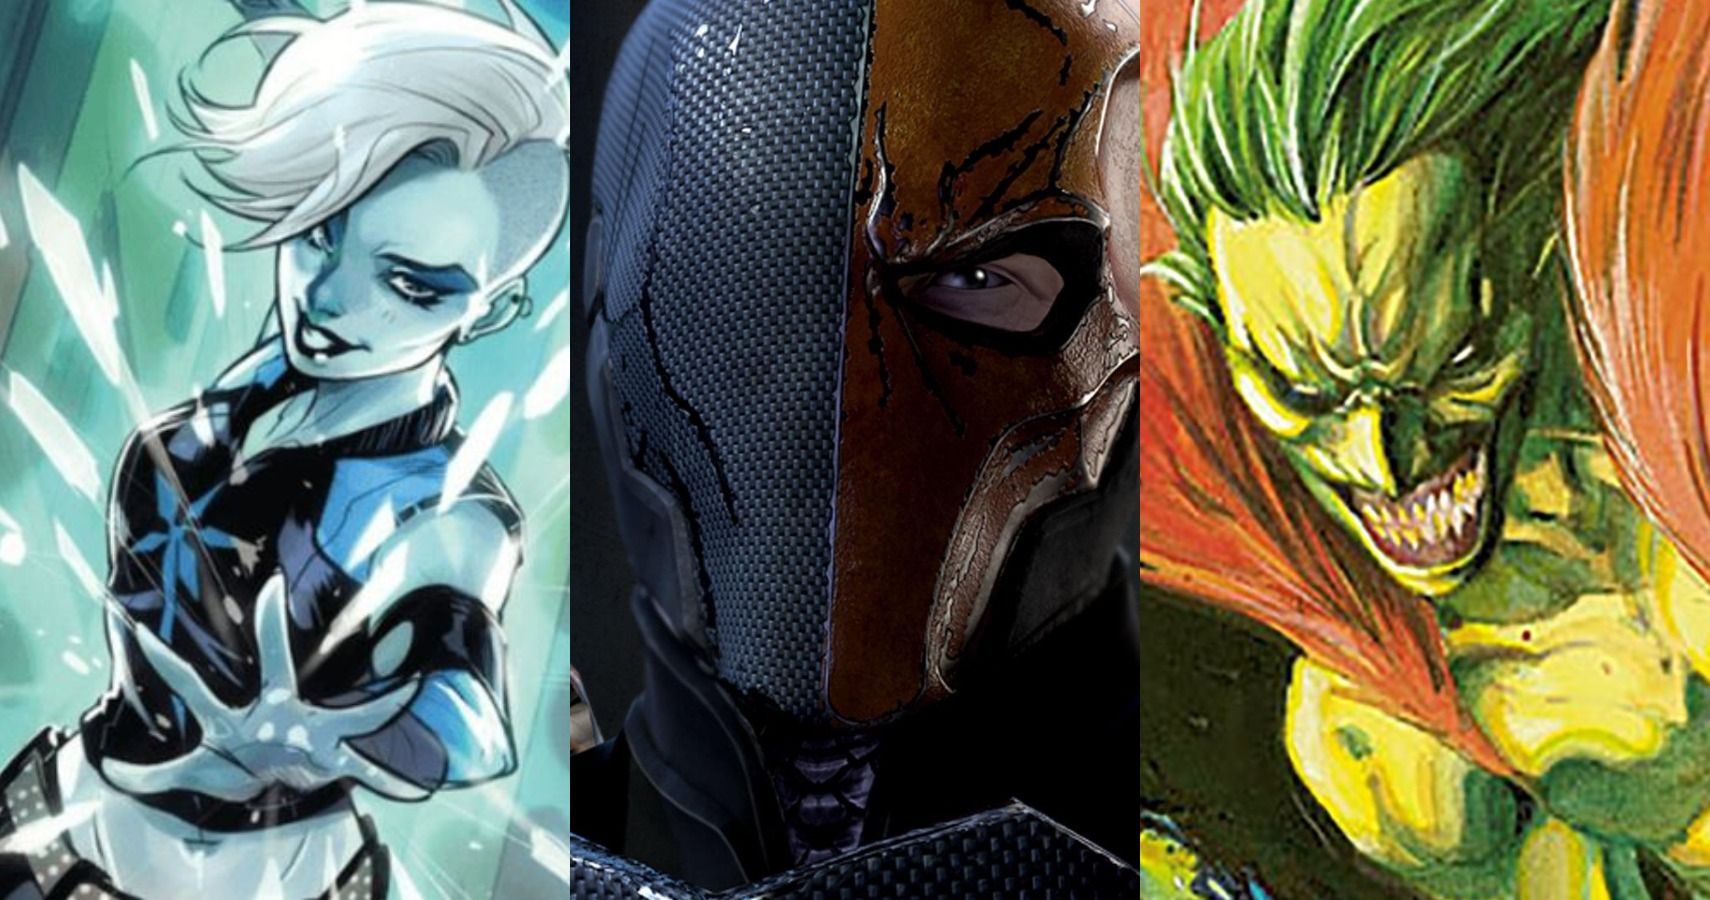 A combined image featuring 3 characters worthy to be in Suicide Squad: Kill the Justice League: Caitlin Snow/Killer Frost on the left, Deathstroke in the middle, and The Creeper on the right.